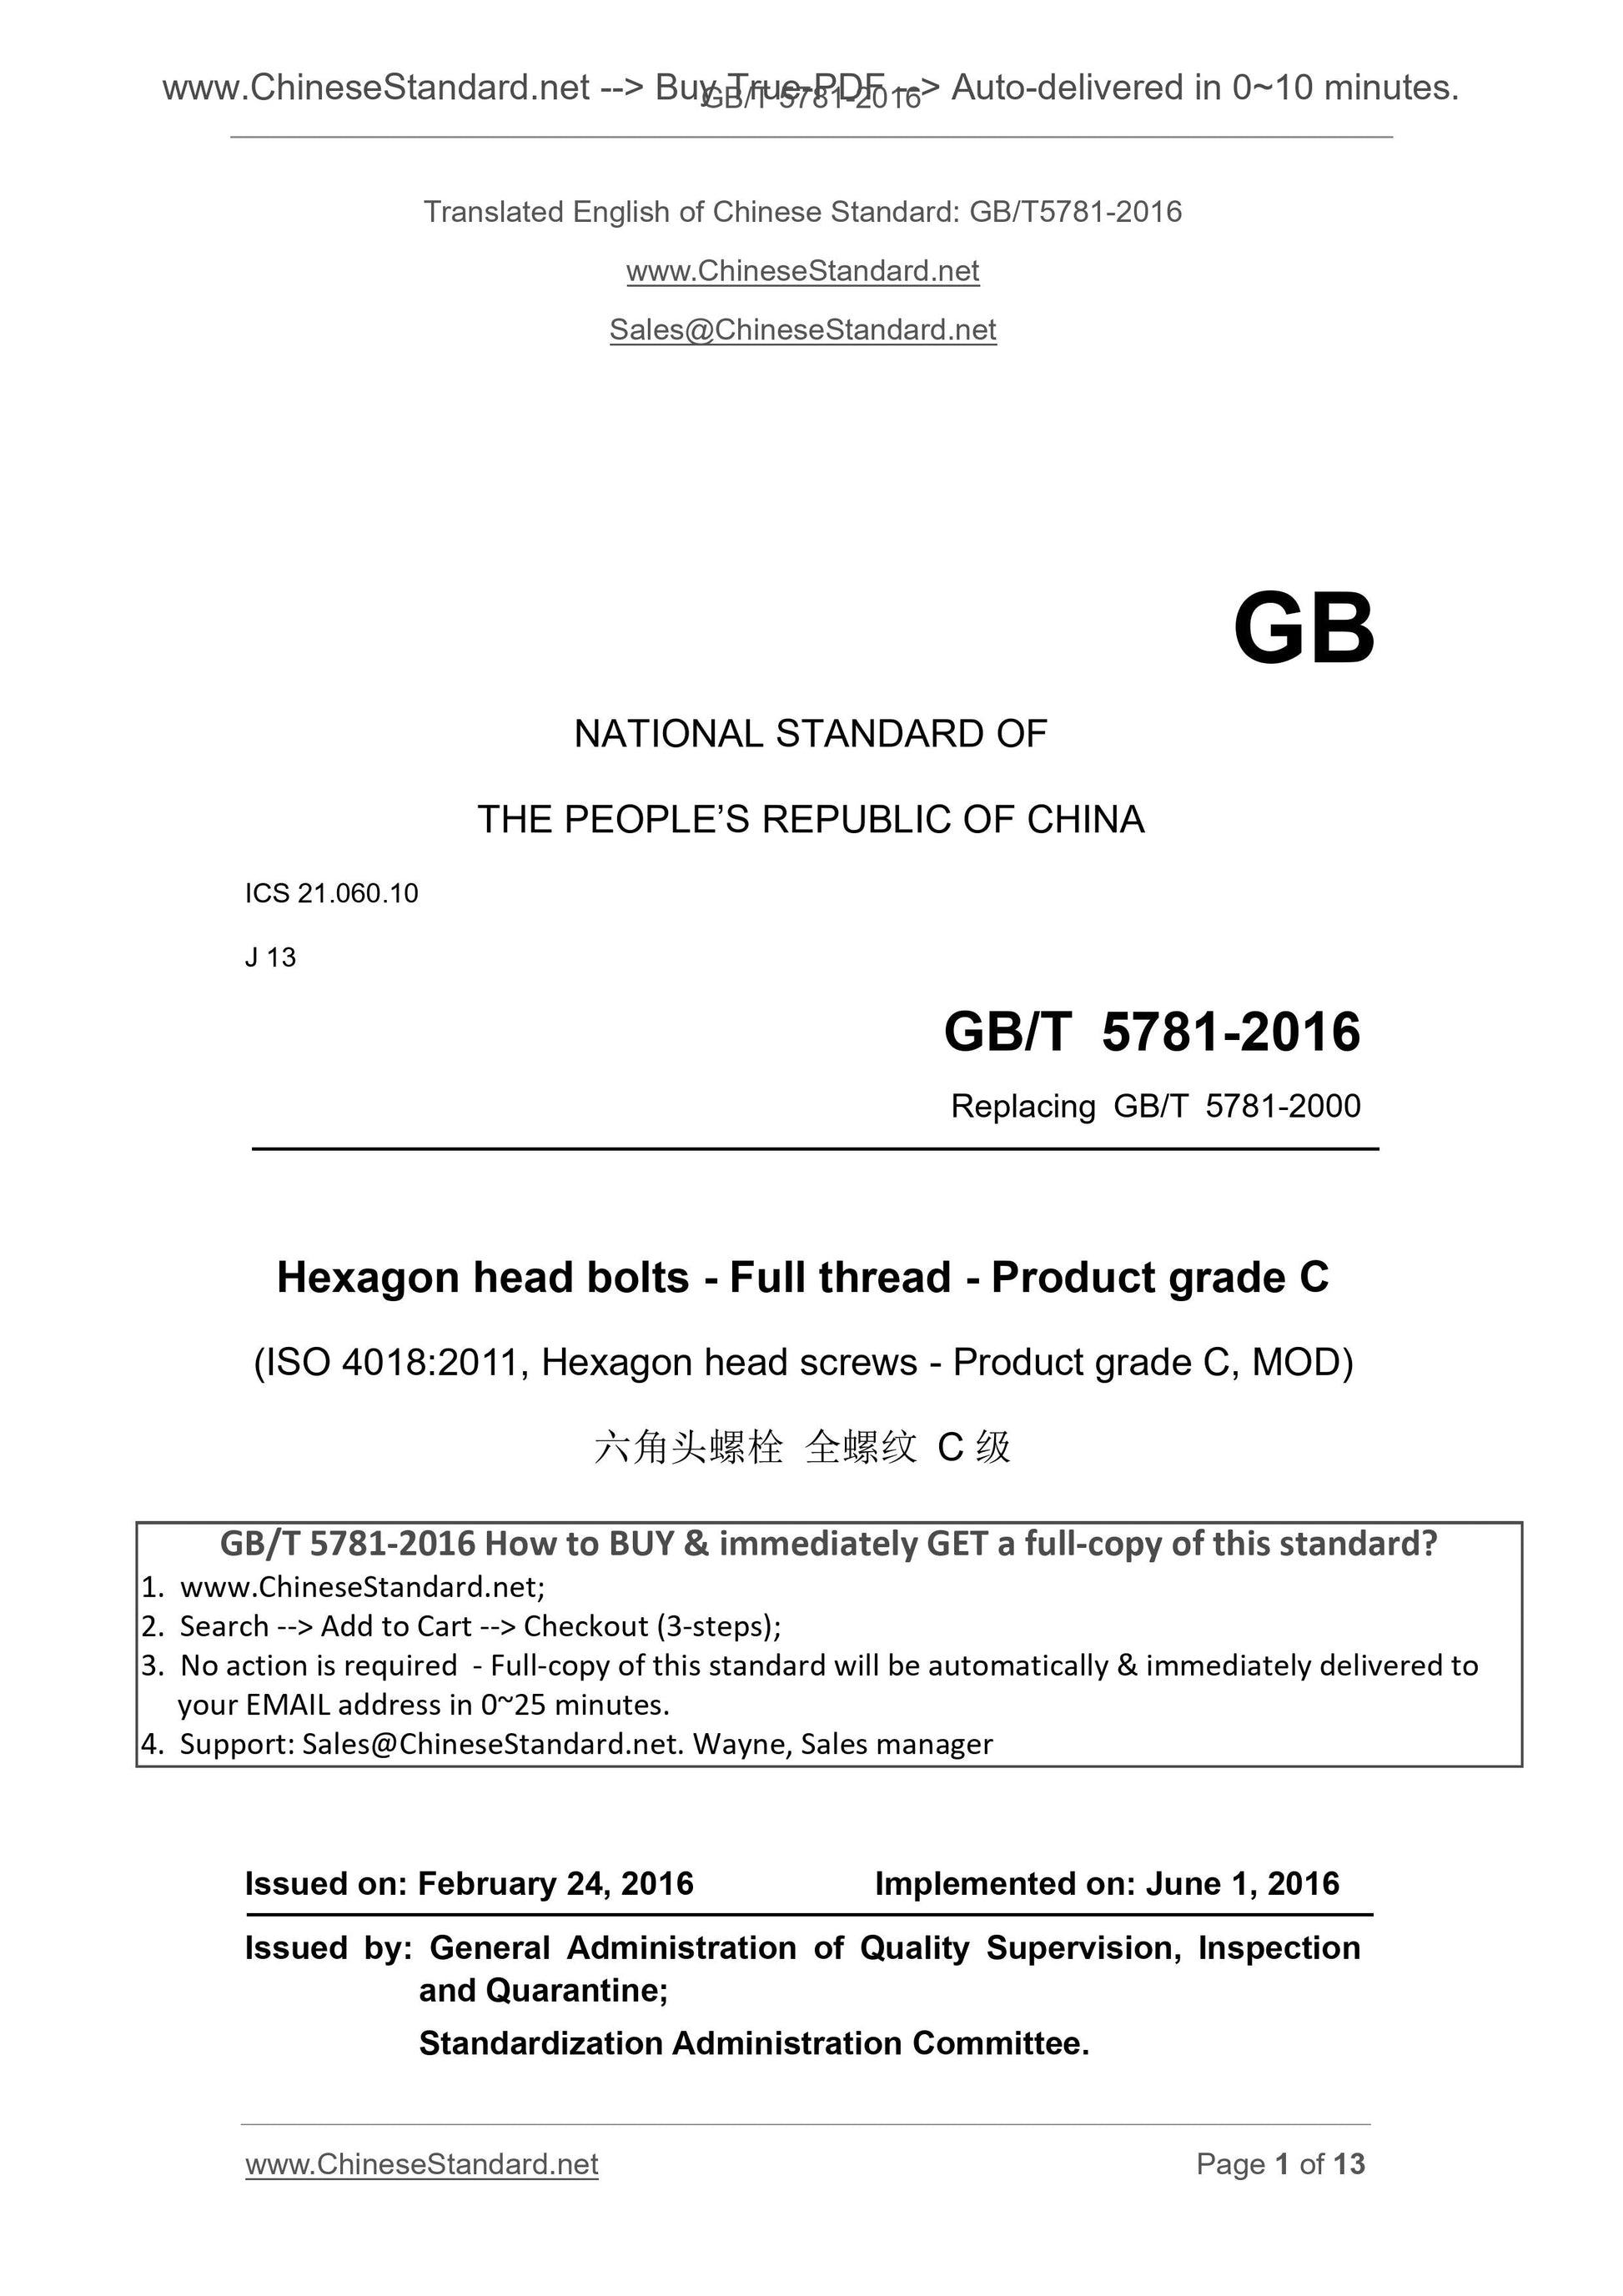 GB/T 5781-2016 Page 1